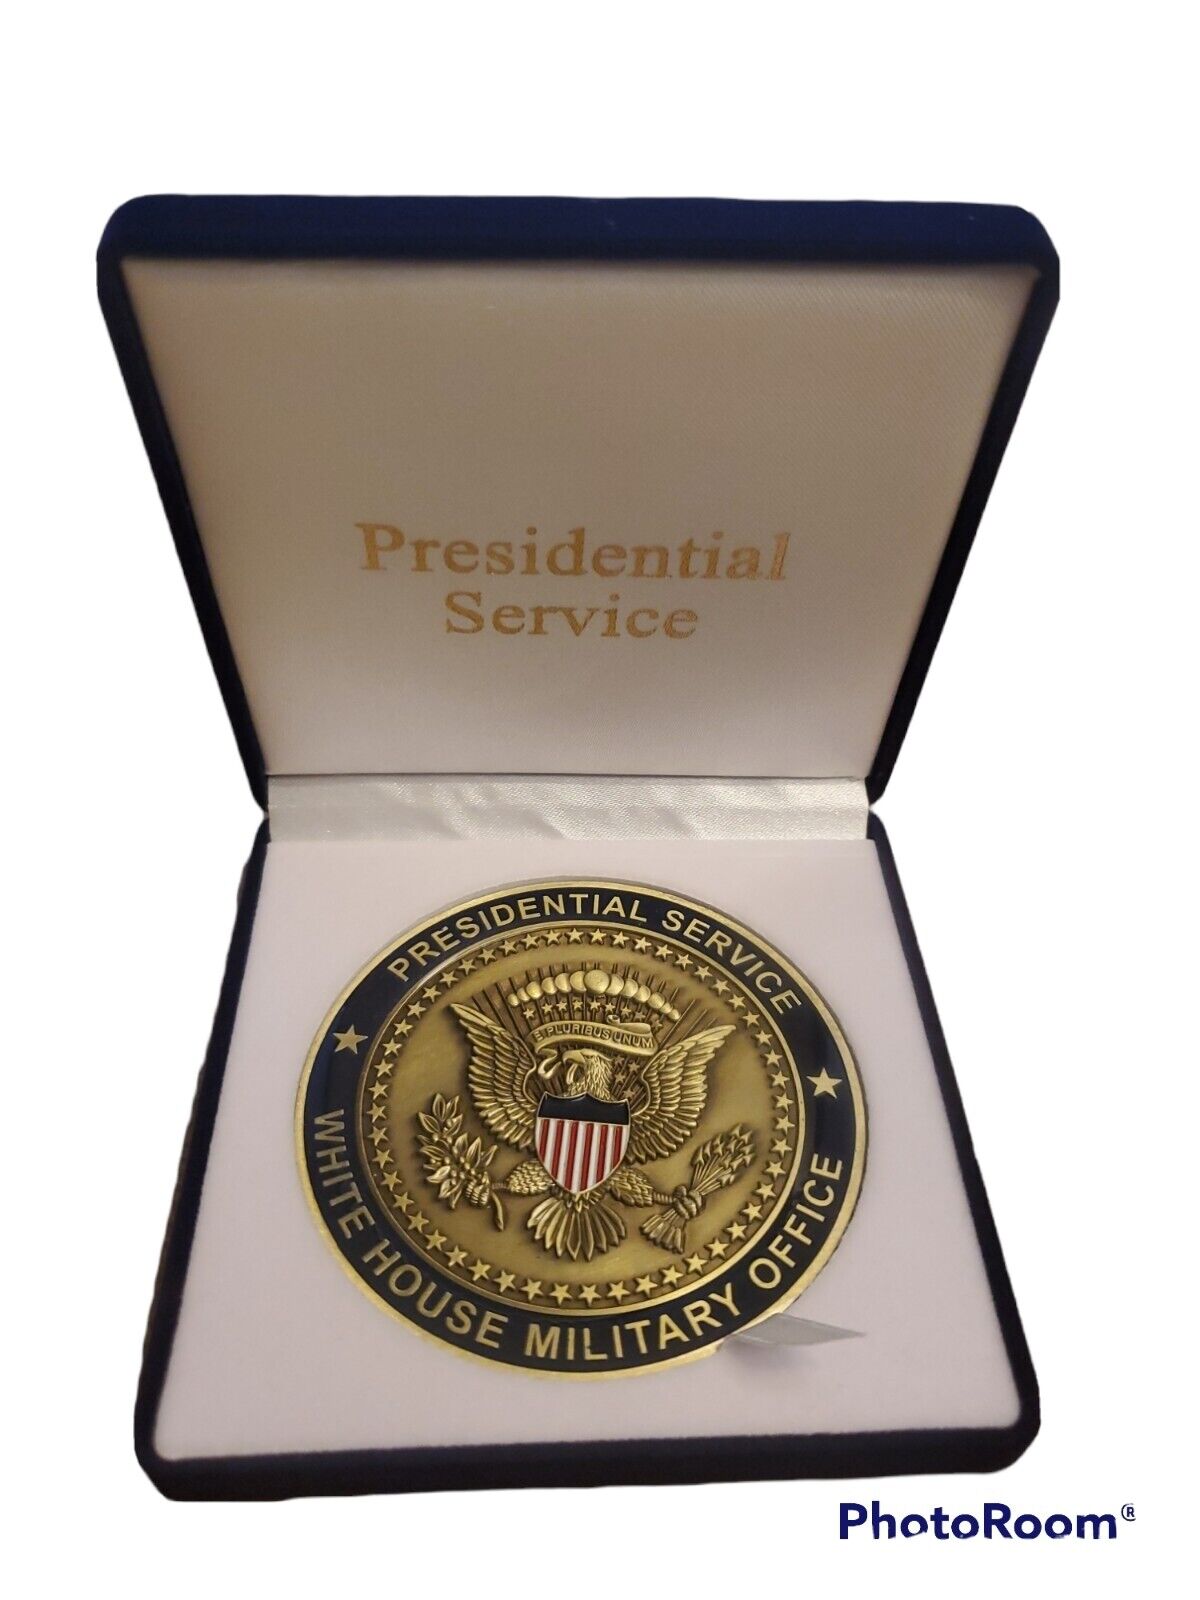 The Presidential Service Coin